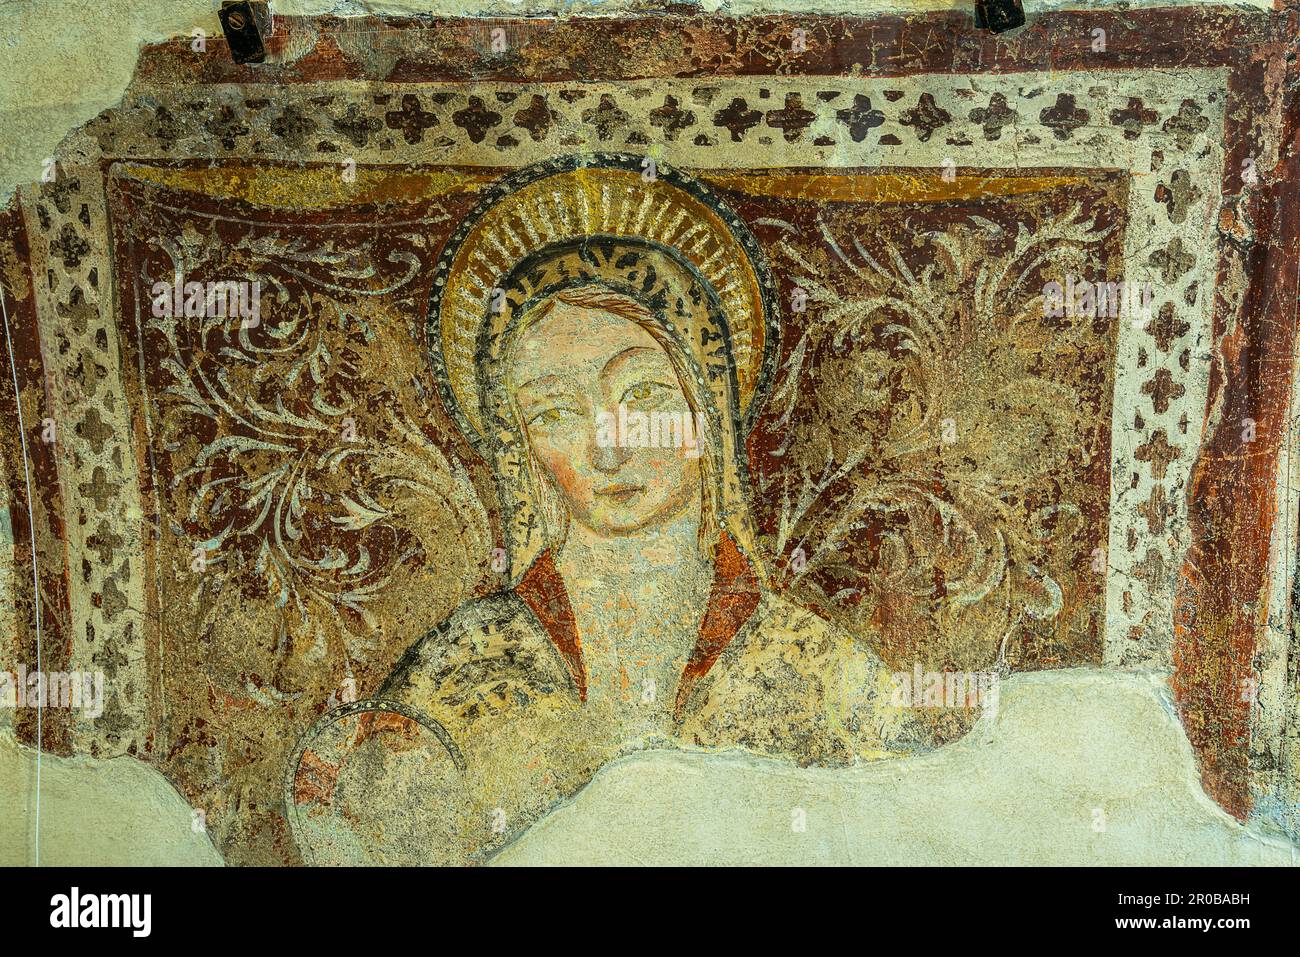 Shrine of the Holy Trinity of Vallepietra, ancient fresco representing the Madonna with the child. Vallepietra, Lazio, Italy, Europe Stock Photo